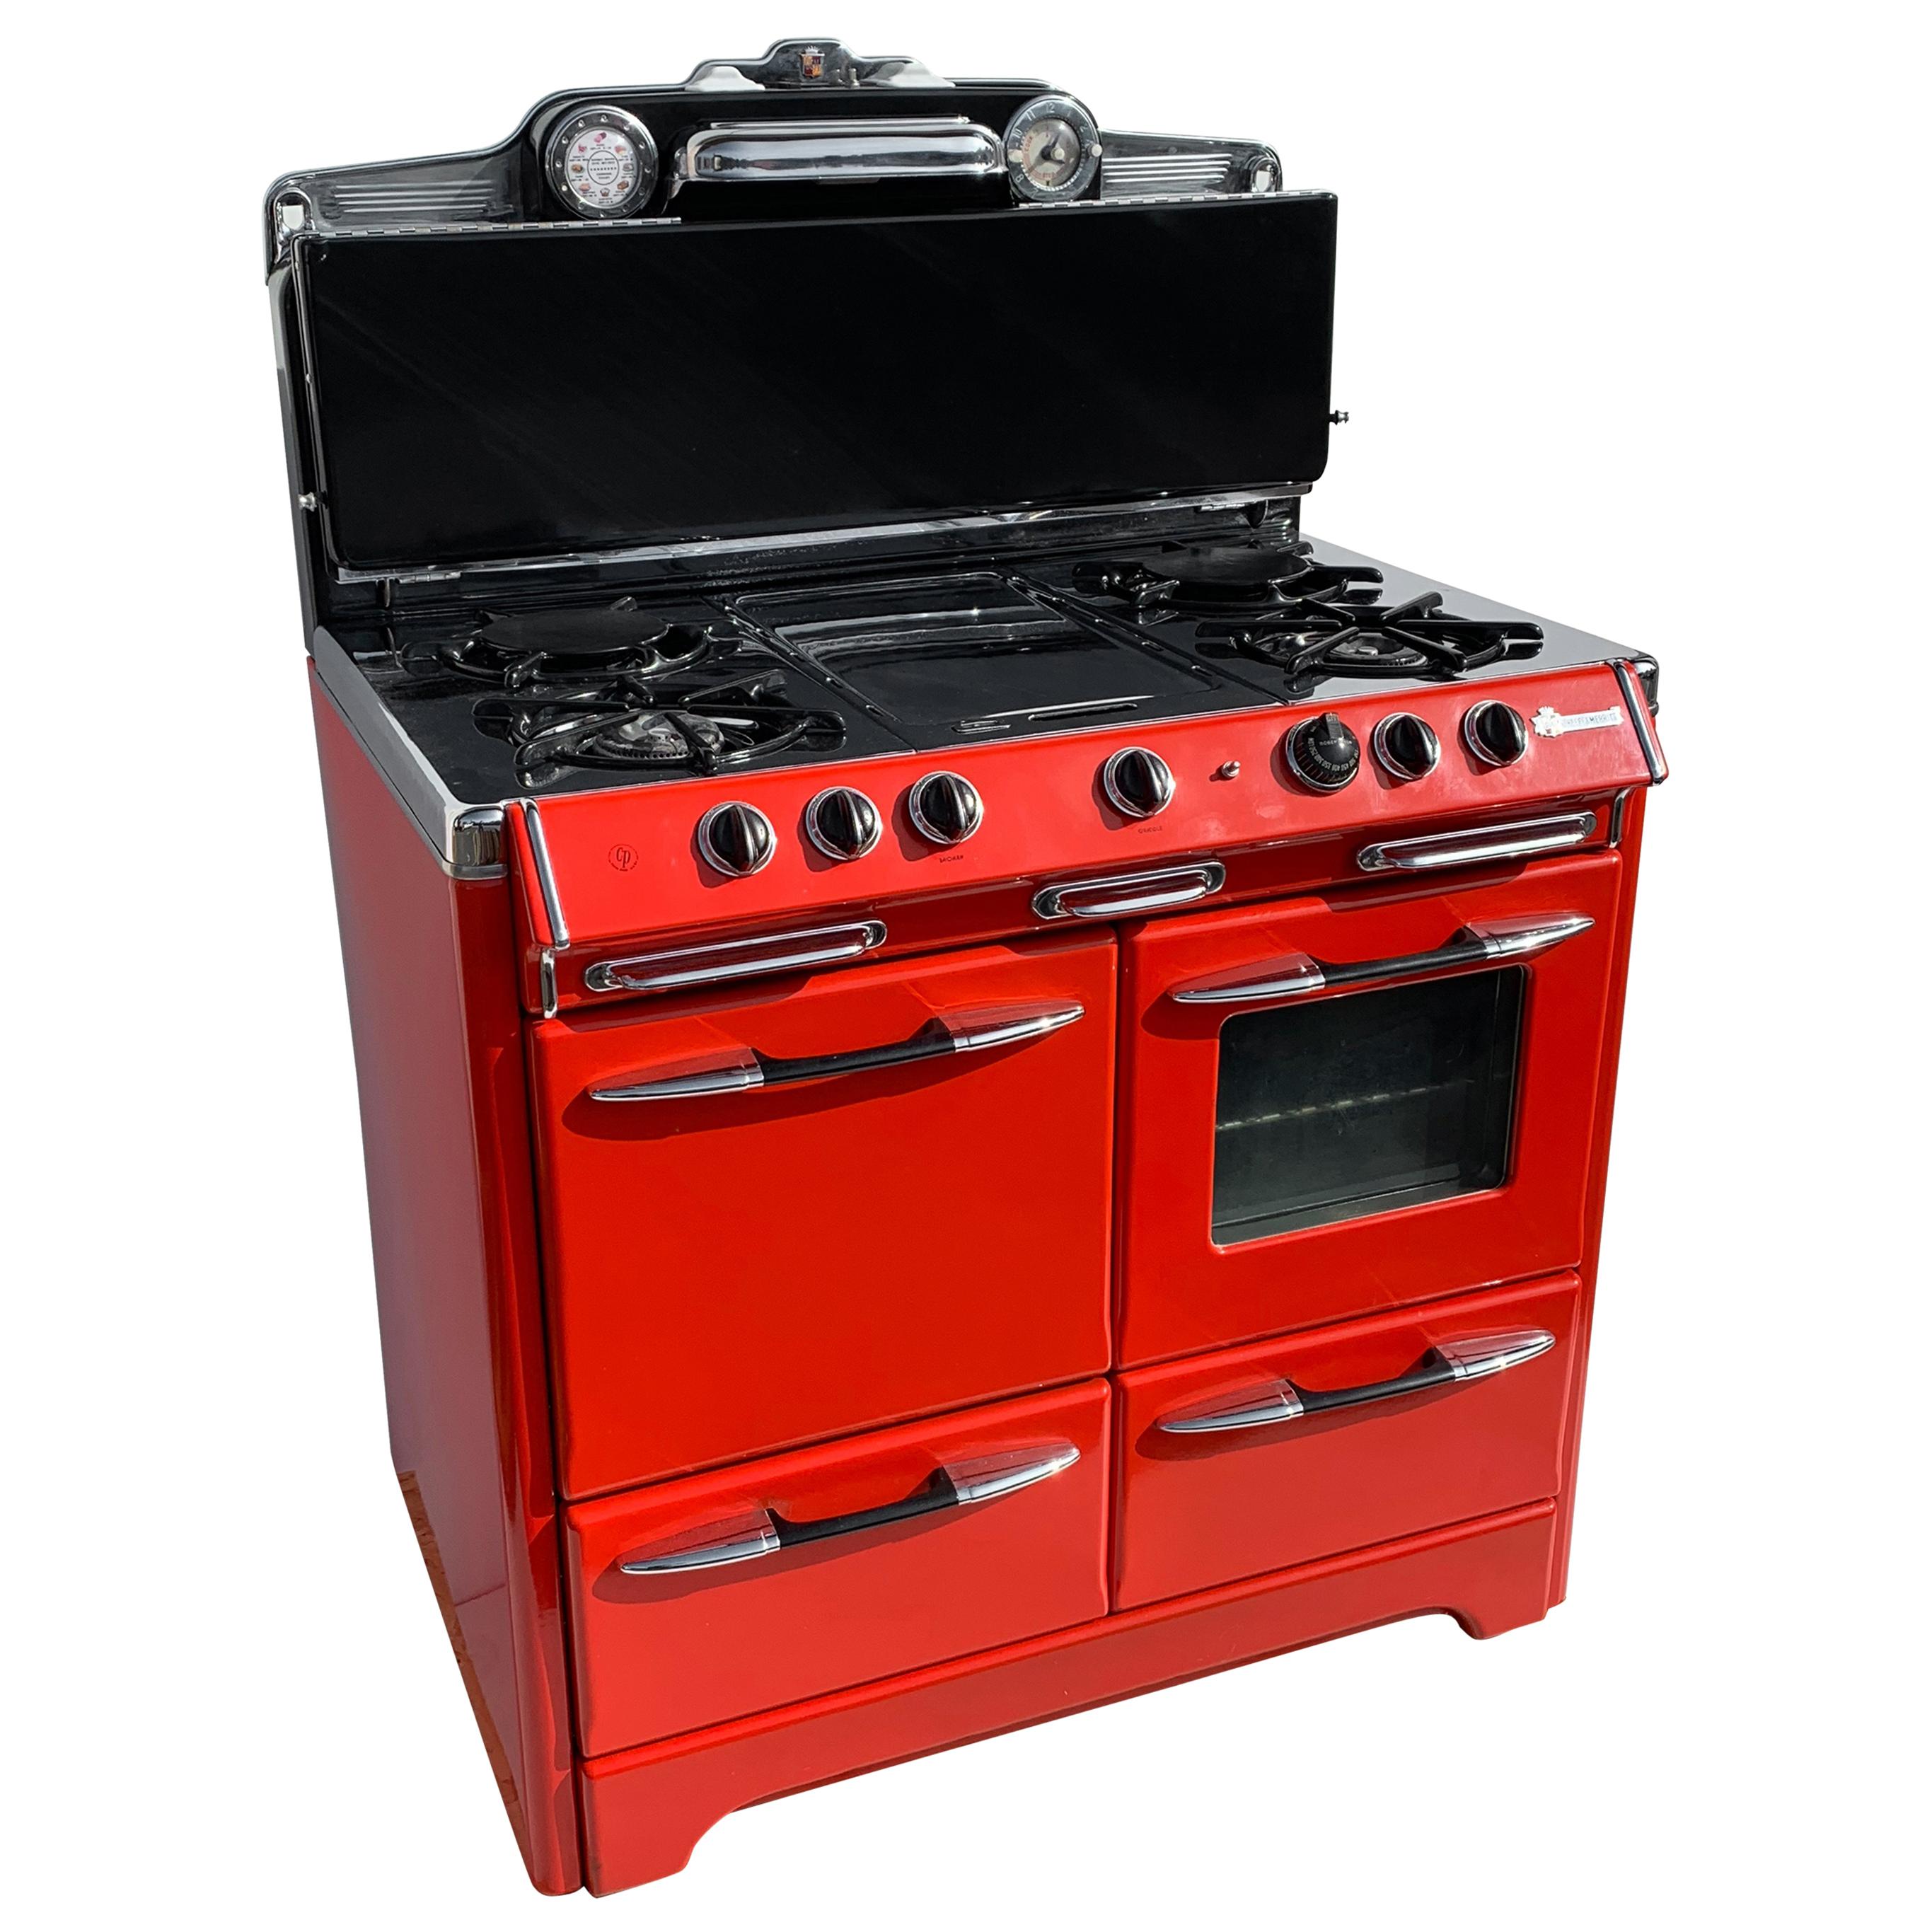 Red O'Keefe & Merritt Stove, 1948 For Sale